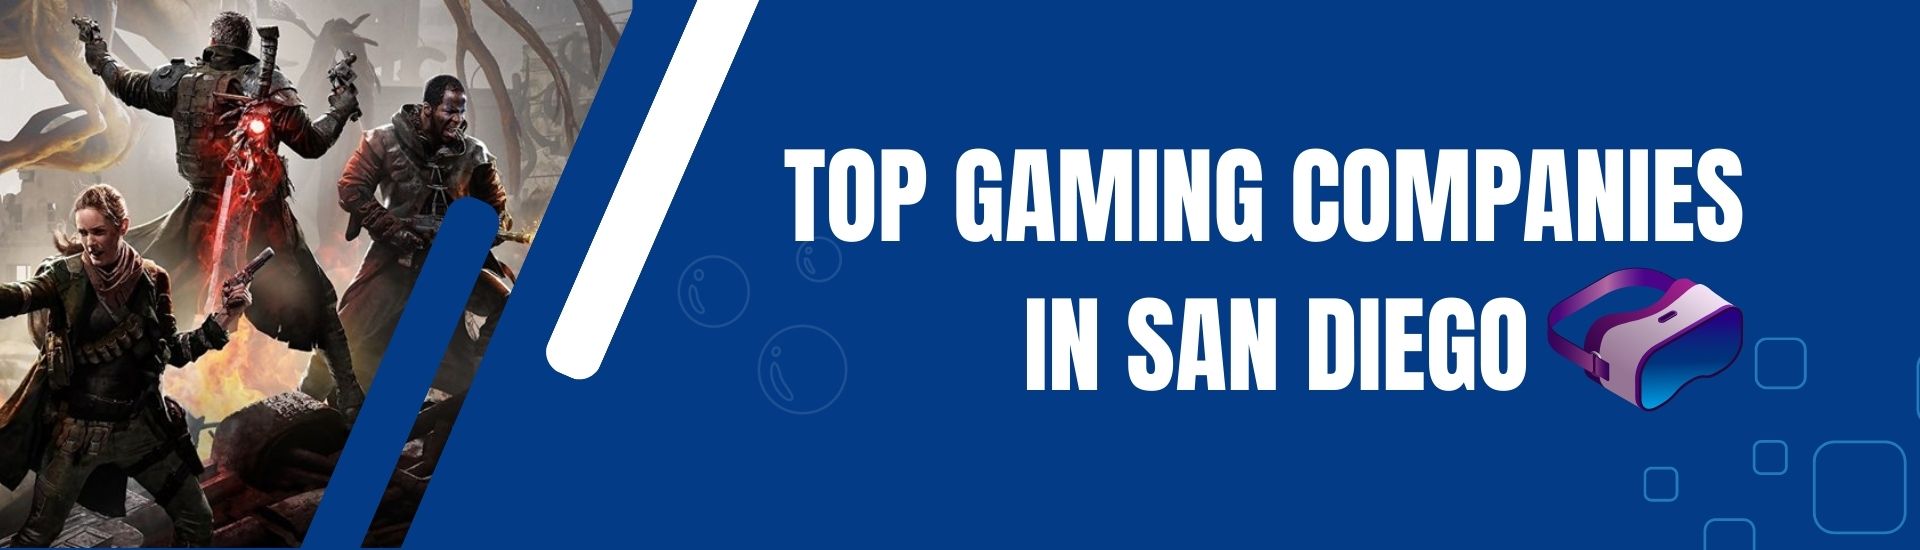 top gaming companies in san diego